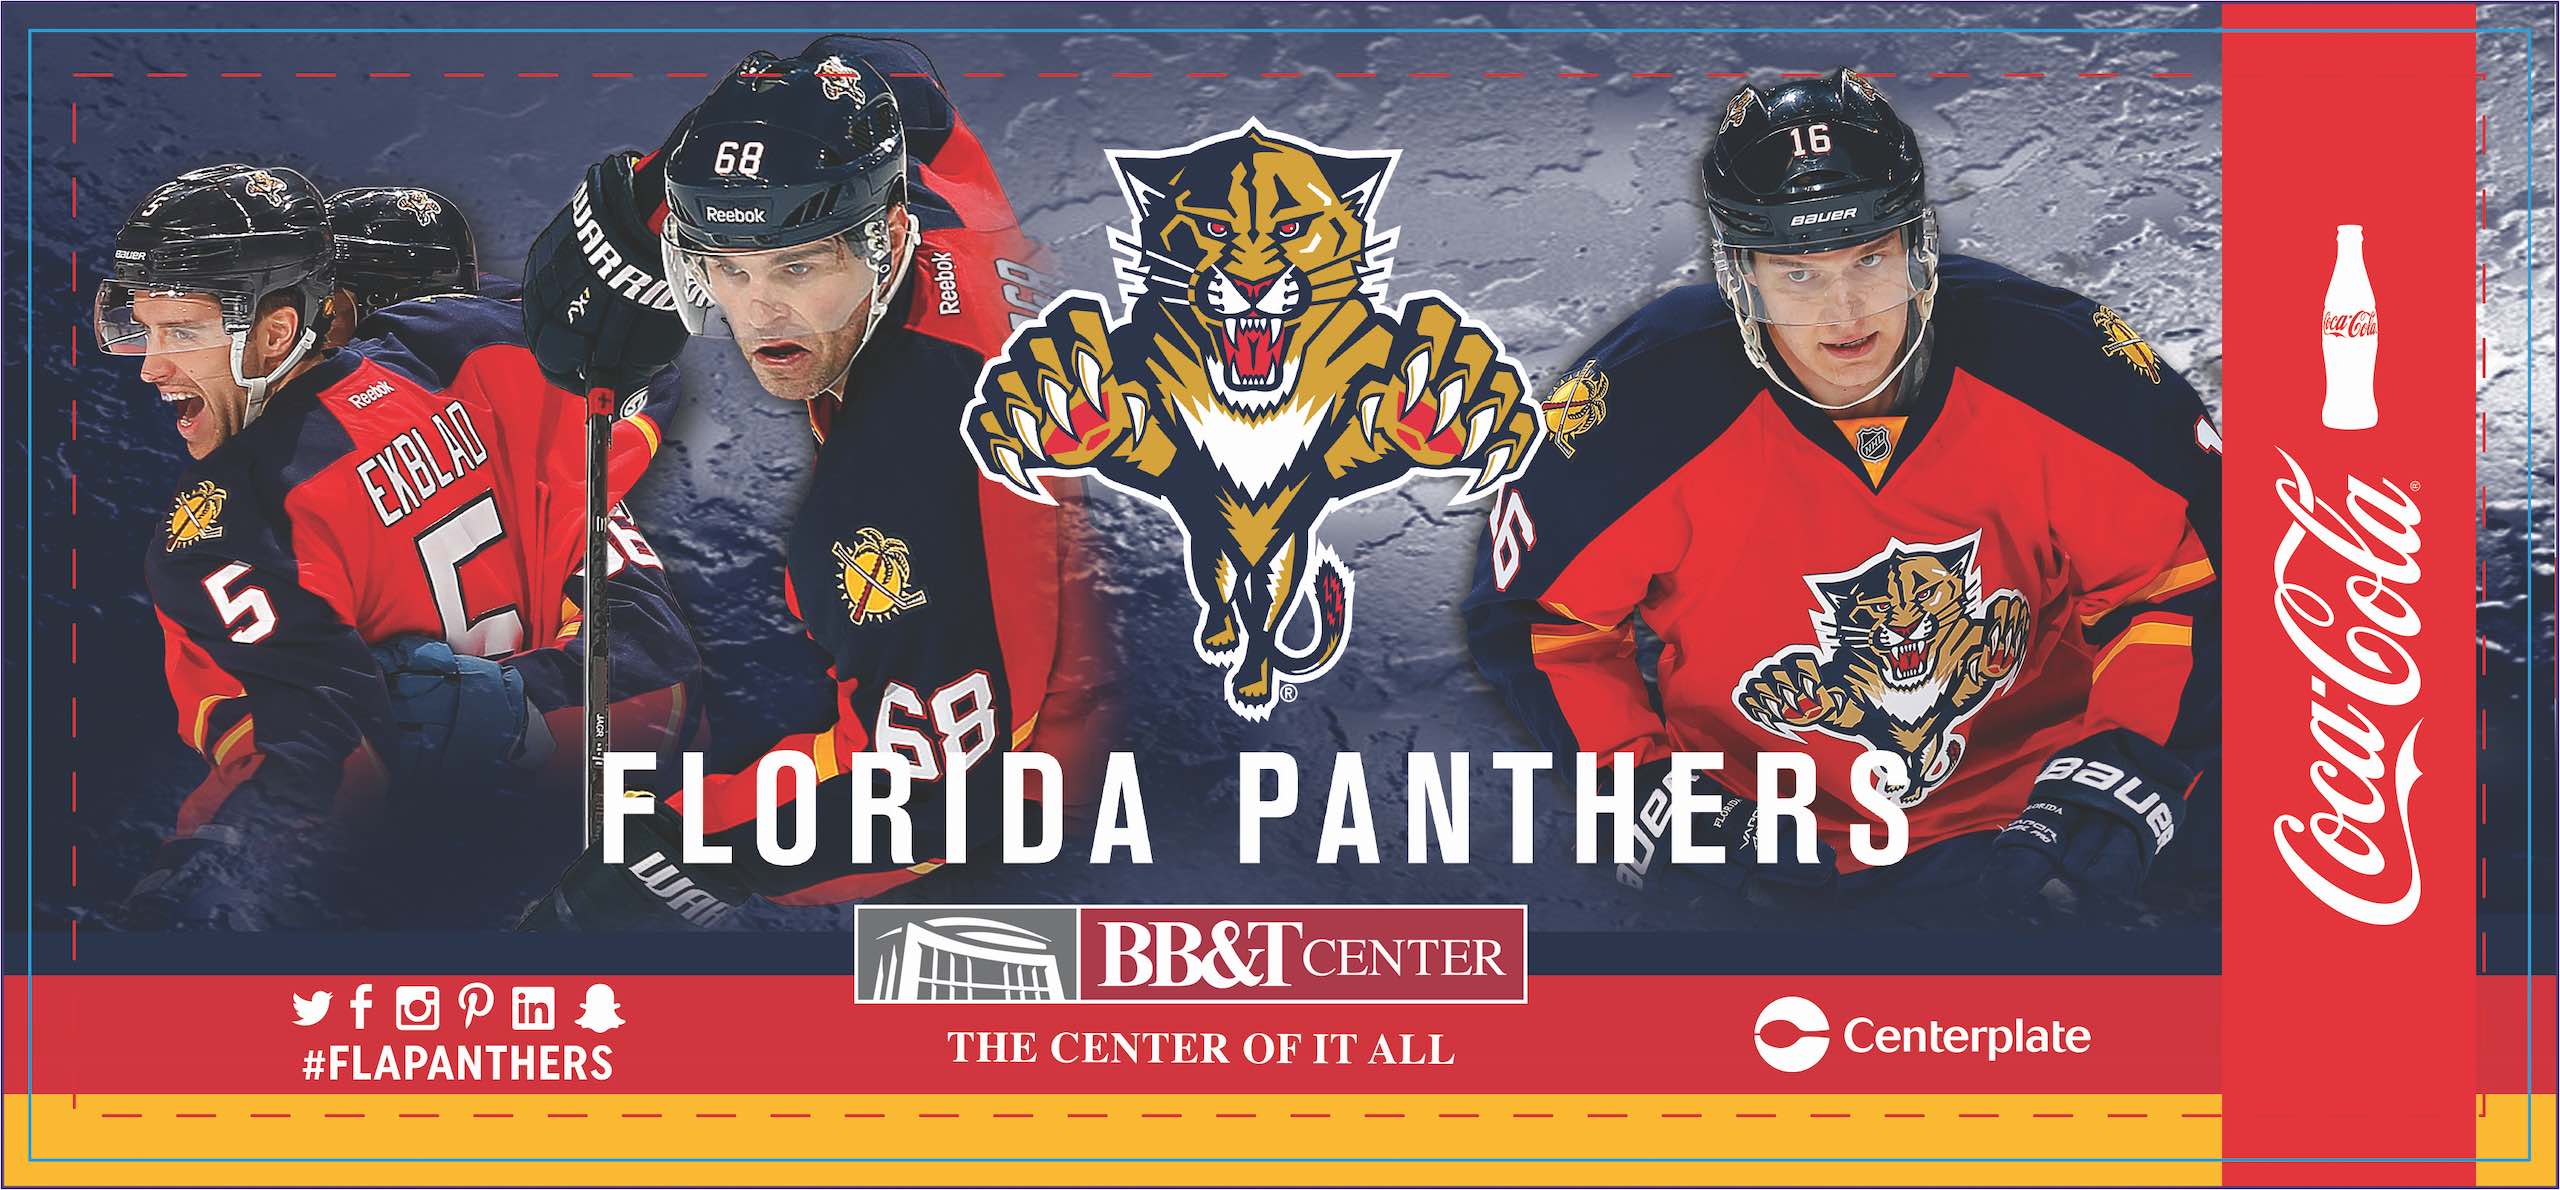 Florida Panthers Arena Cup BB&T Center Ad